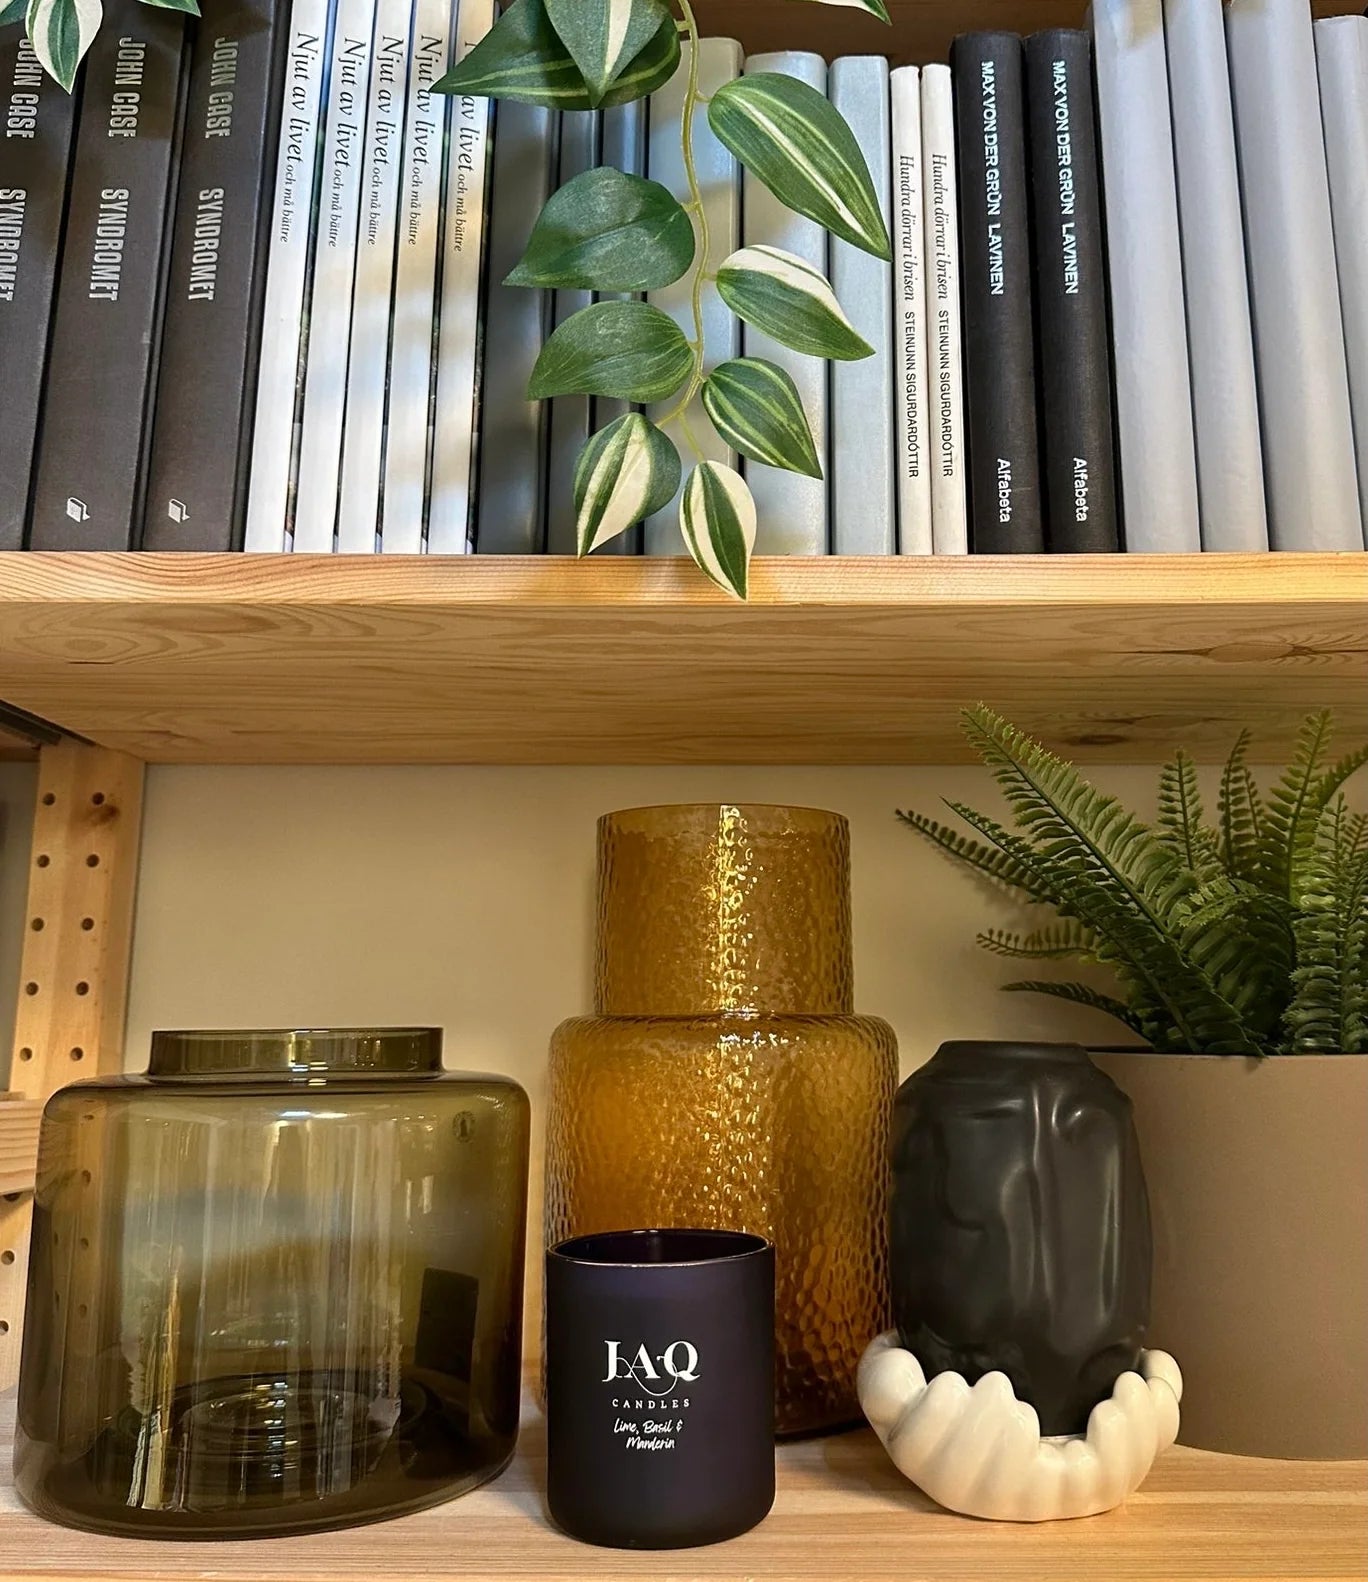 Lime Basil & Mandarin Candle by JAQ Candles